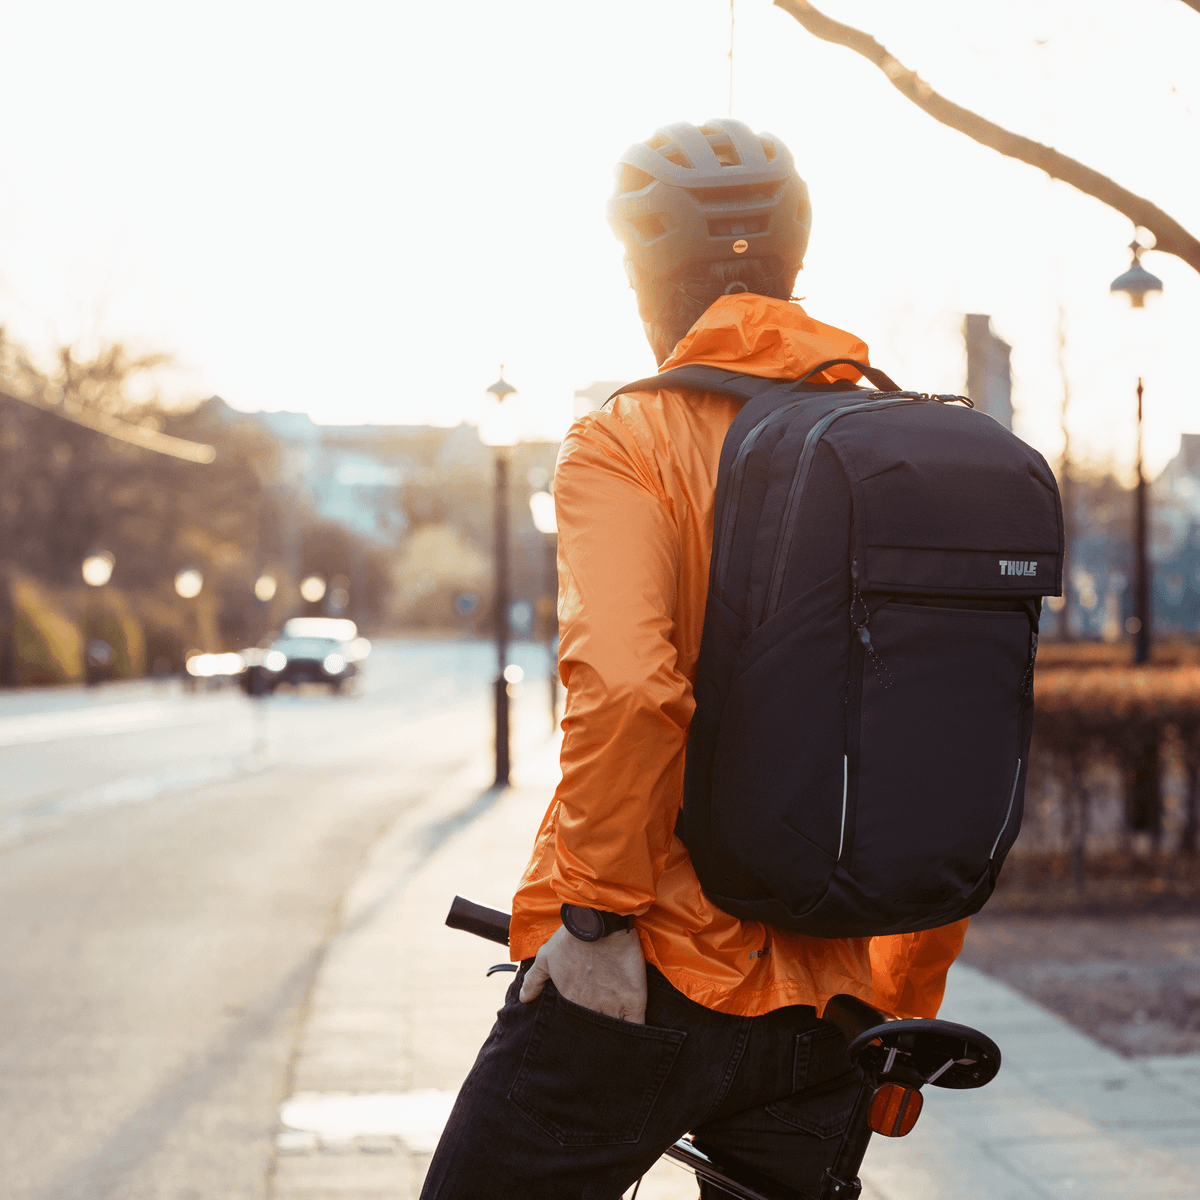 A cyclist by a city street looks at the sunshine, carrying a black 27L Thule Paramount Commuter Backpack.